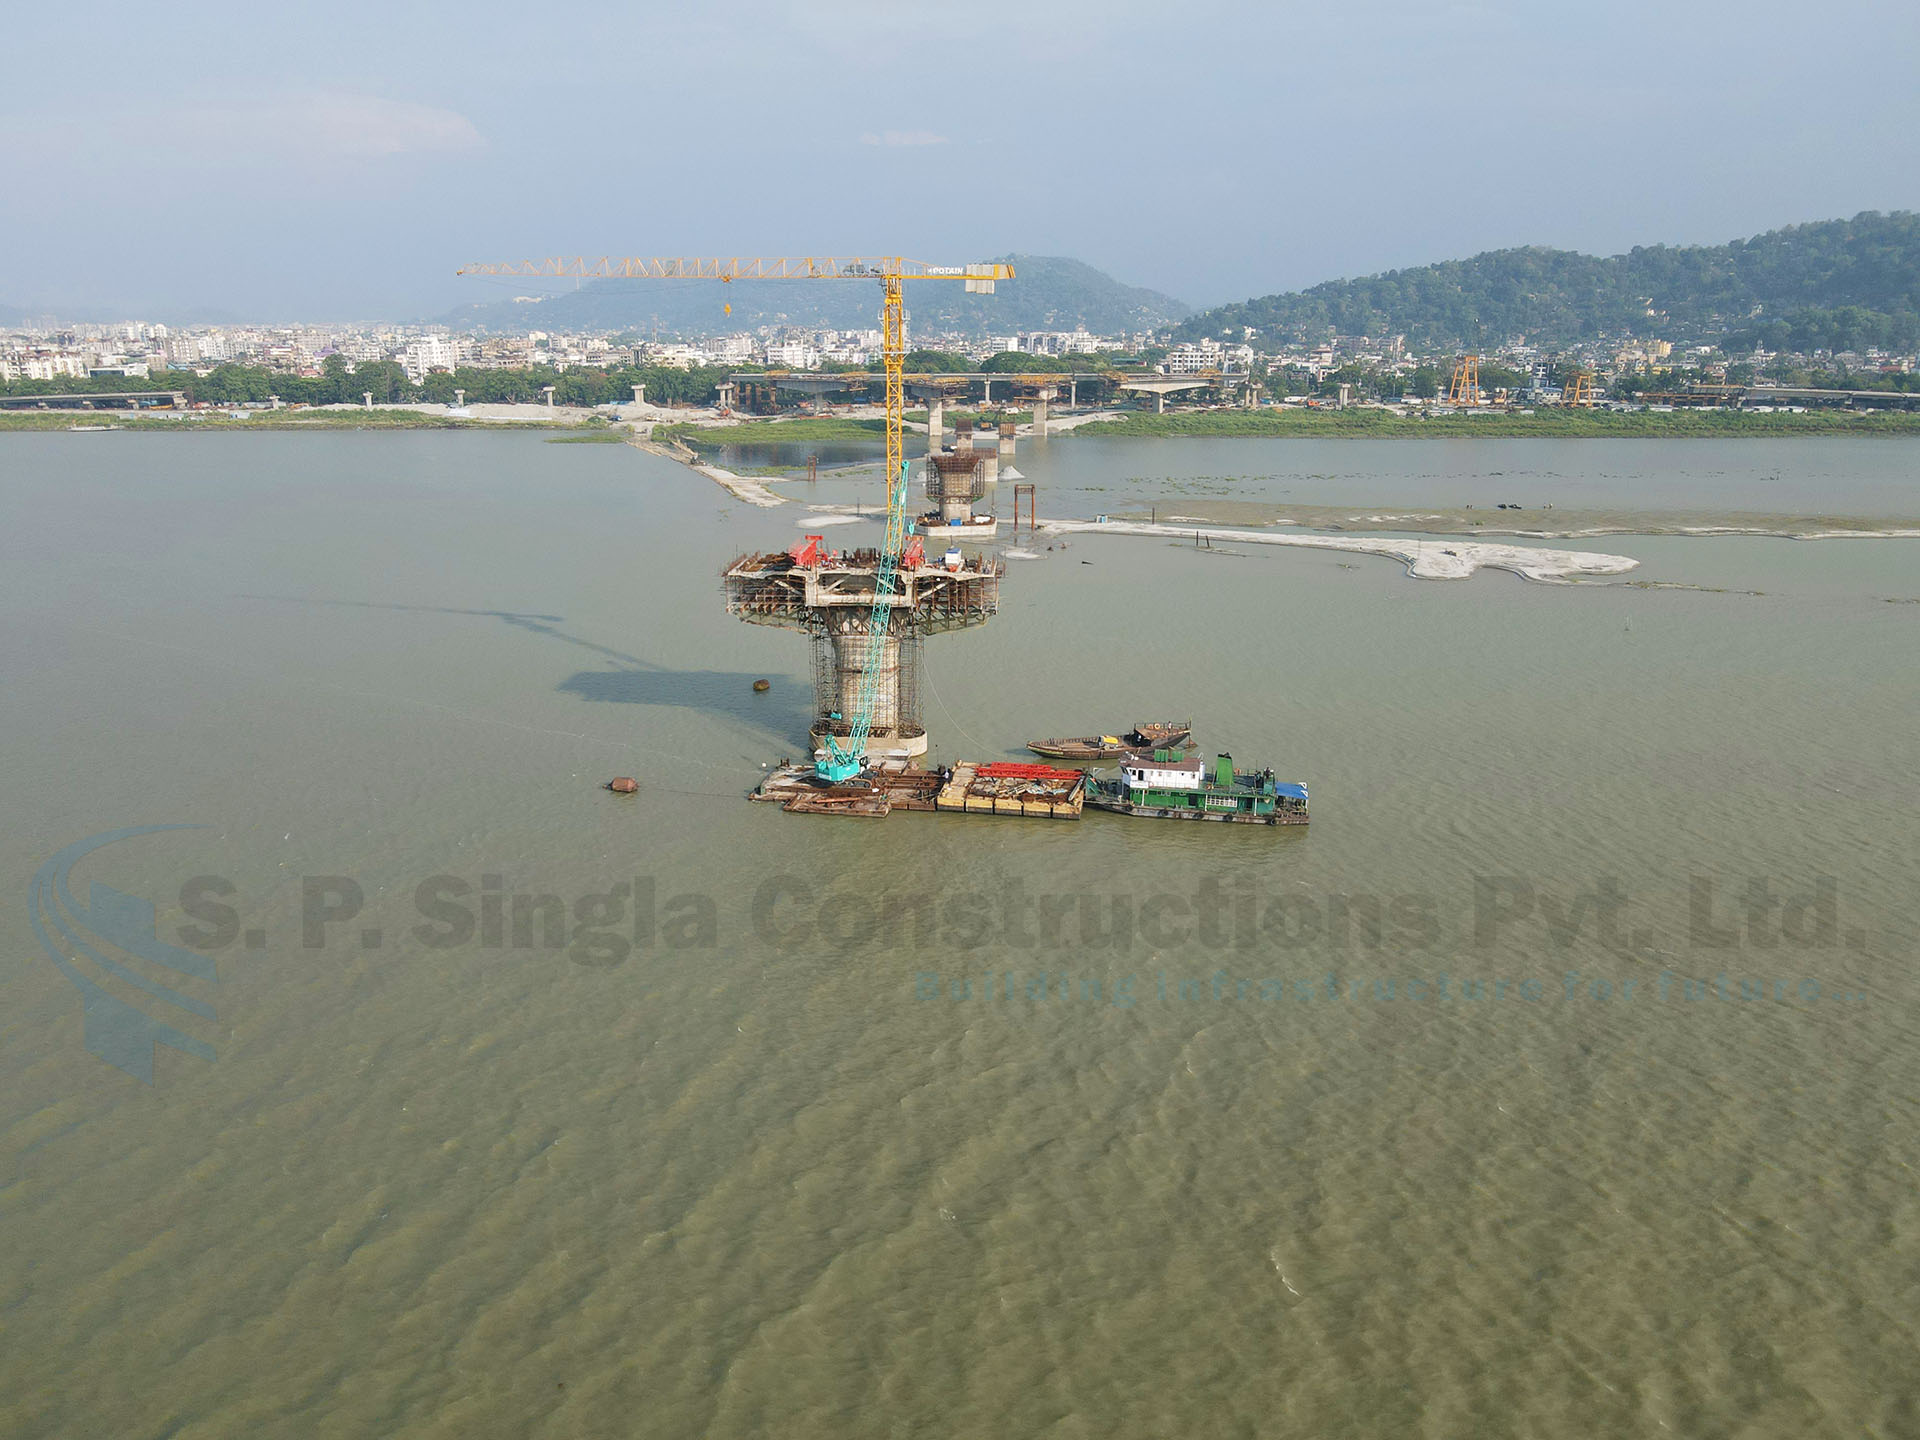 Extradosed PSC Bridge across river Brahmputra connecting Guwahati and North Guwahati in Assam